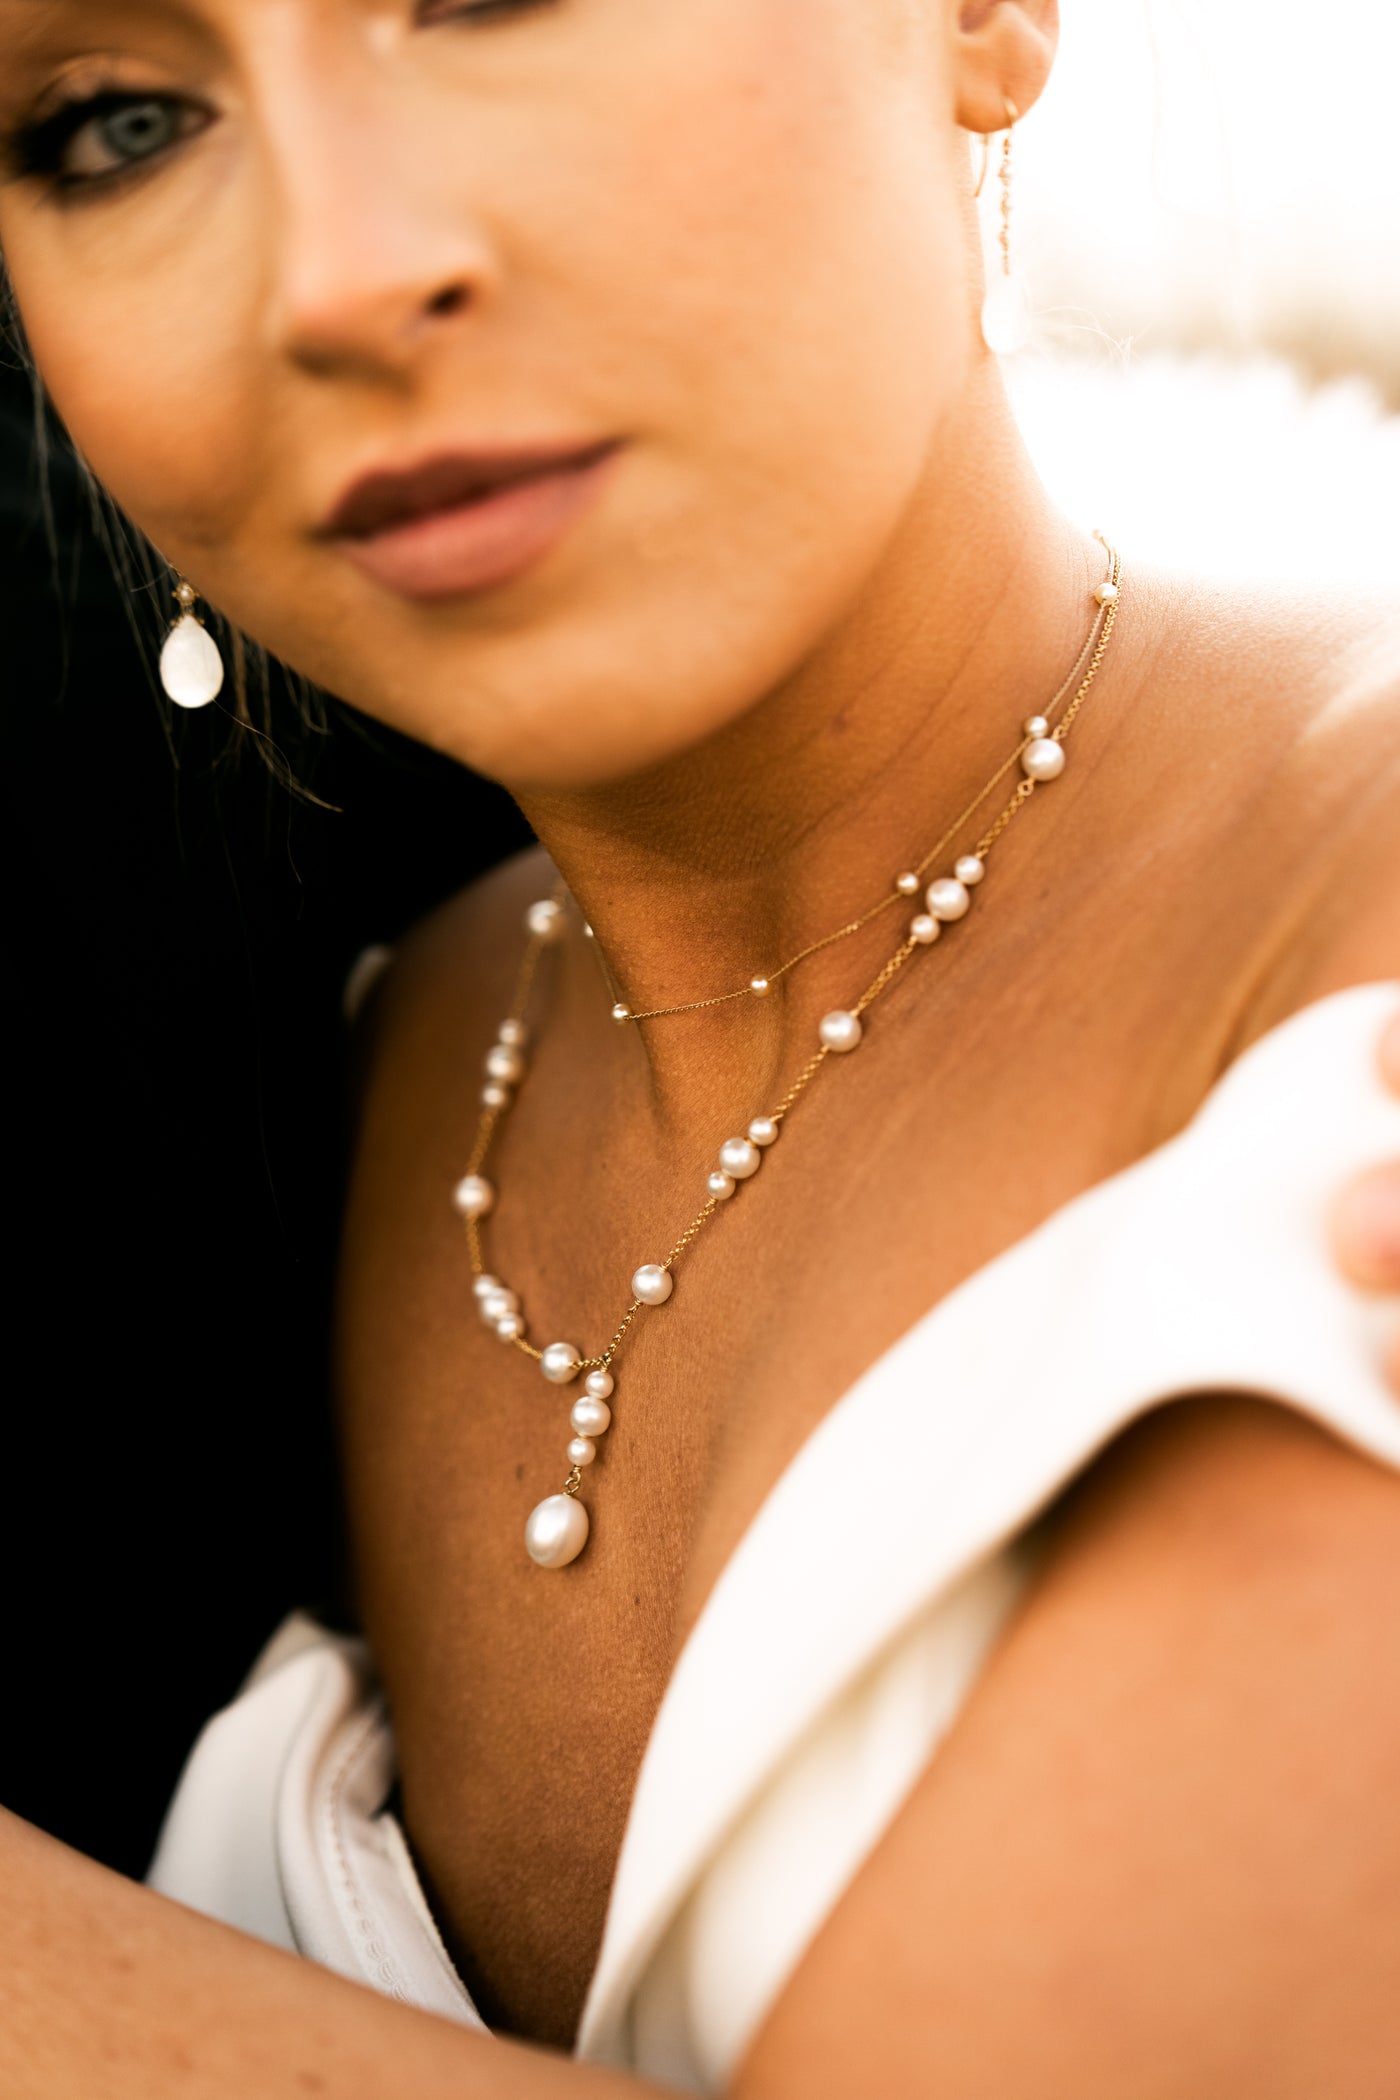 6 Reasons Why Pearls Are the Perfect Bridal Accessory